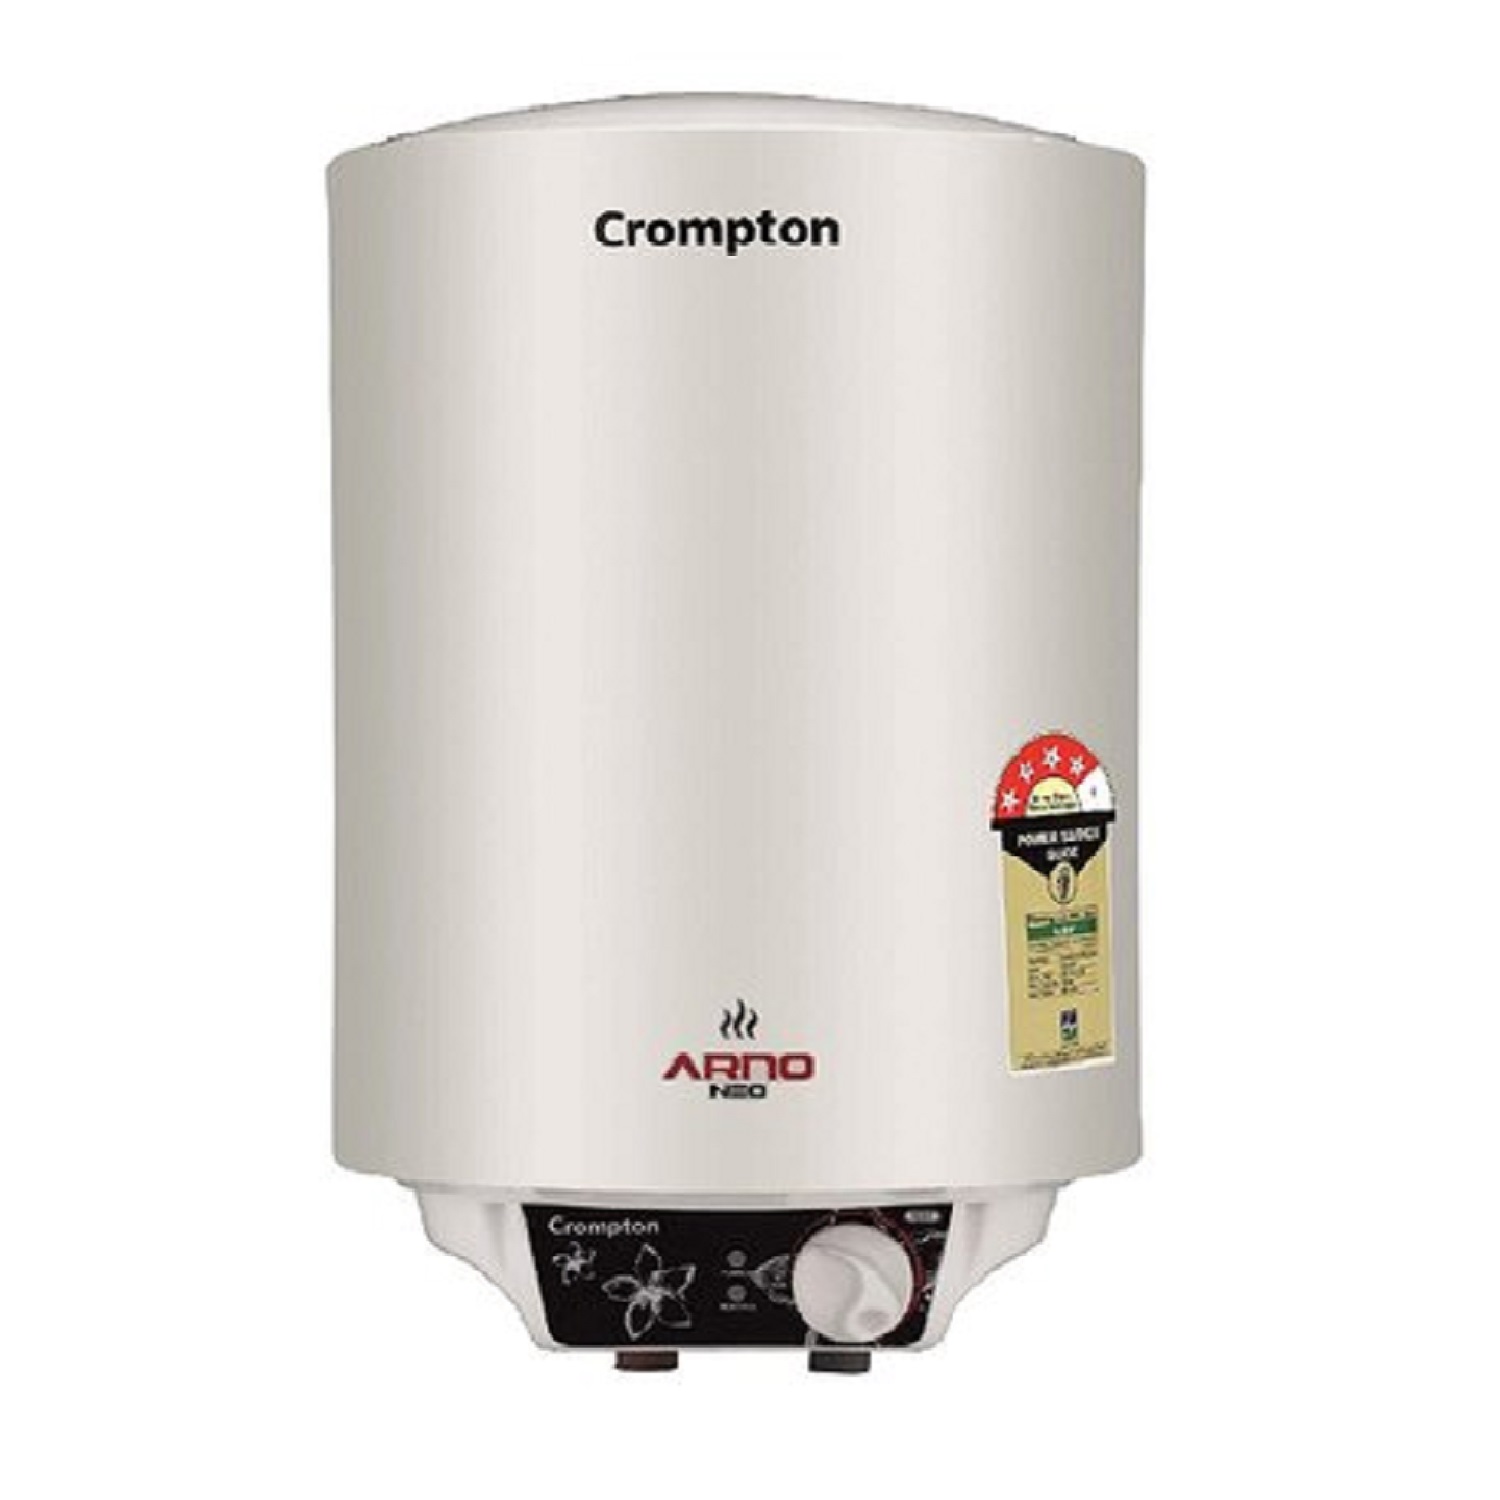 Crompton  GEYSER - SWH-625 25 Litre 8 bar pressure Anodic hard water protection 40% energy saving Capillary thermostat and pressure booster friendly